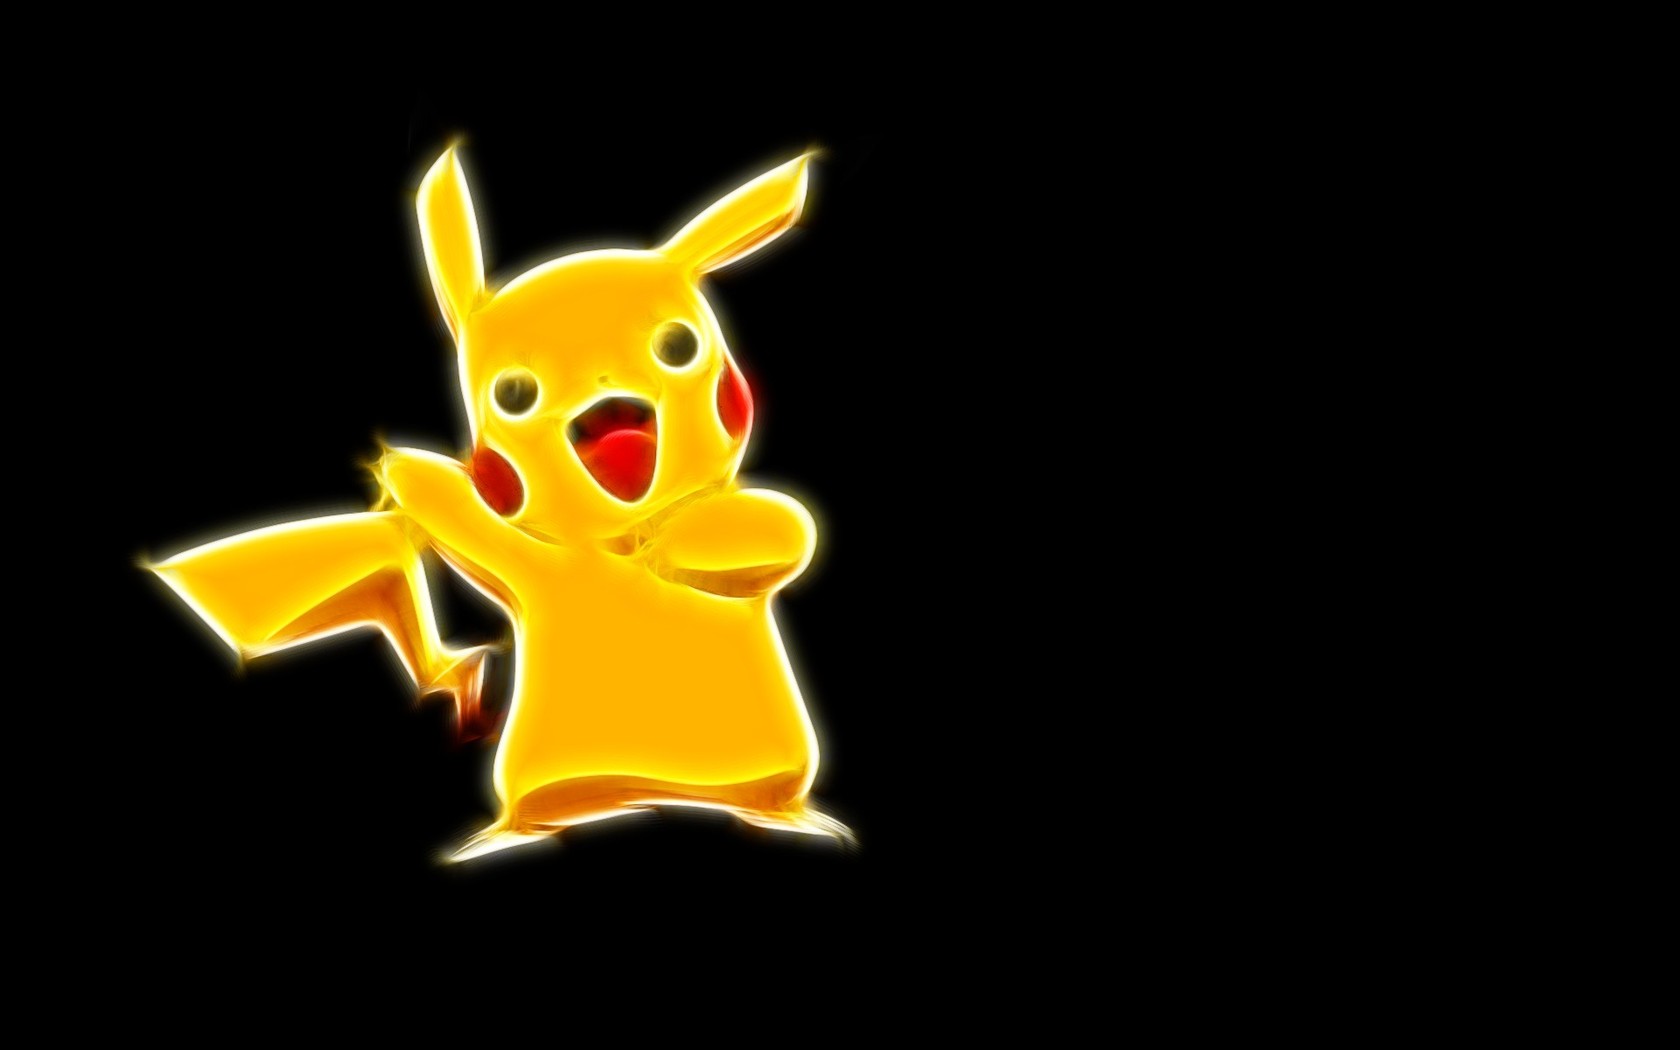 Pikachu Wallpaper Desktop Pc Android iPhone And iPad